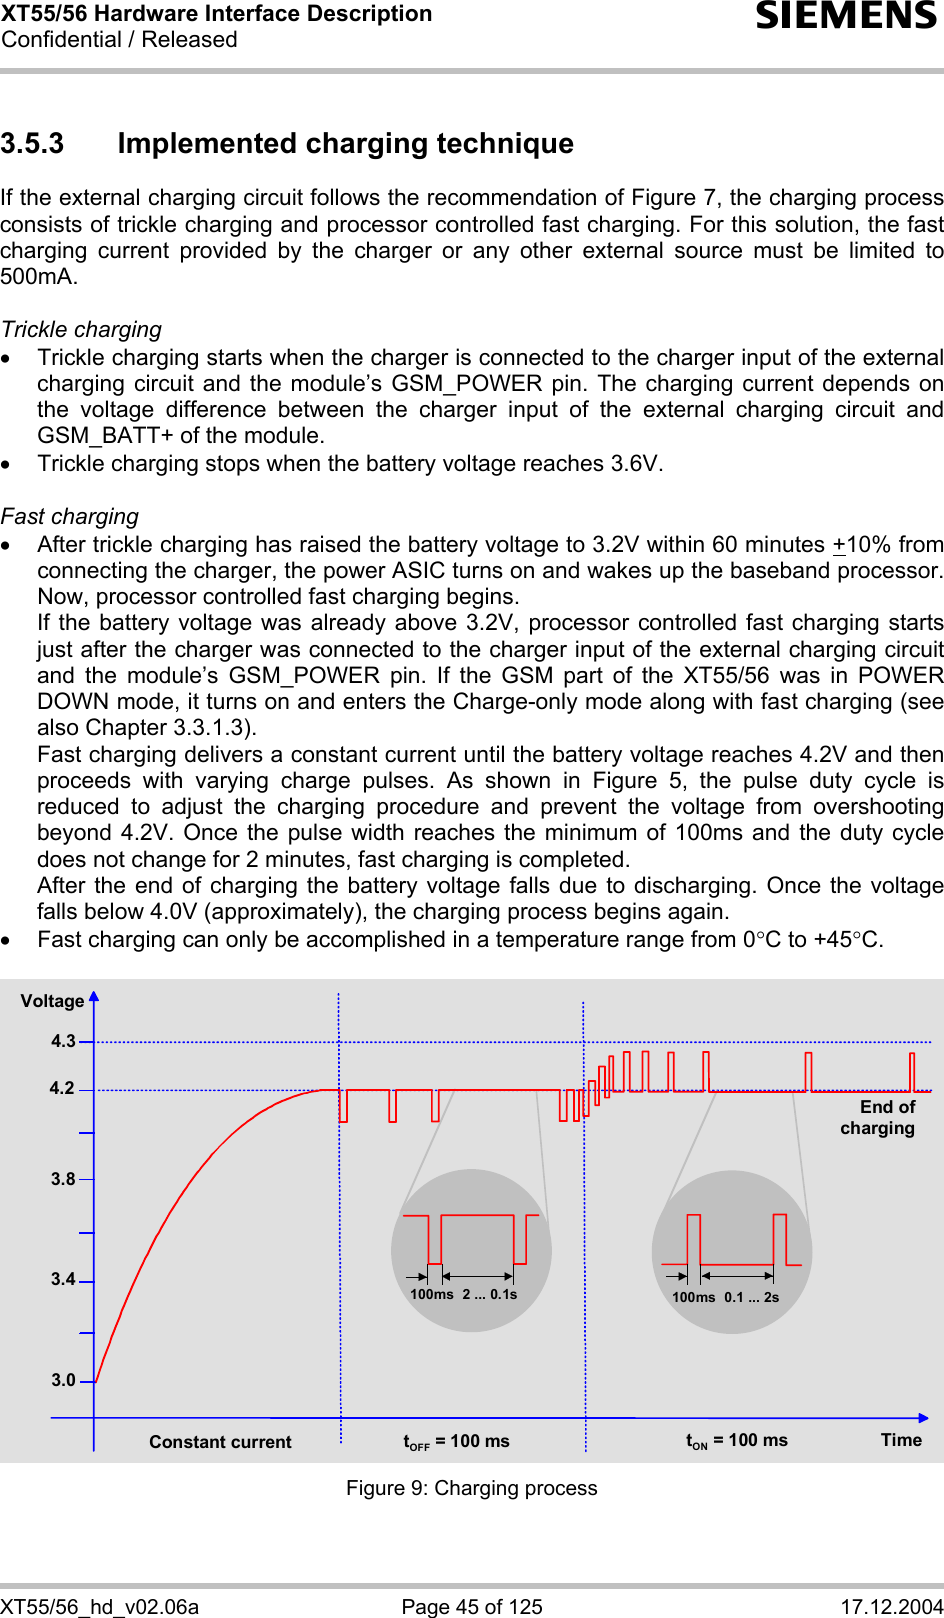 XT55/56 Hardware Interface Description Confidential / Released s XT55/56_hd_v02.06a  Page 45 of 125  17.12.2004 3.5.3  Implemented charging technique If the external charging circuit follows the recommendation of Figure 7, the charging process consists of trickle charging and processor controlled fast charging. For this solution, the fast charging current provided by the charger or any other external source must be limited to 500mA.   Trickle charging •  Trickle charging starts when the charger is connected to the charger input of the external charging circuit and the module’s GSM_POWER pin. The charging current depends on the voltage difference between the charger input of the external charging circuit and GSM_BATT+ of the module.  •  Trickle charging stops when the battery voltage reaches 3.6V.  Fast charging  •  After trickle charging has raised the battery voltage to 3.2V within 60 minutes +10% from connecting the charger, the power ASIC turns on and wakes up the baseband processor. Now, processor controlled fast charging begins.  If the battery voltage was already above 3.2V, processor controlled fast charging starts just after the charger was connected to the charger input of the external charging circuit and the module’s GSM_POWER pin. If the GSM part of the XT55/56 was in POWER DOWN mode, it turns on and enters the Charge-only mode along with fast charging (see also Chapter 3.3.1.3). Fast charging delivers a constant current until the battery voltage reaches 4.2V and then proceeds with varying charge pulses. As shown in Figure 5, the pulse duty cycle is reduced to adjust the charging procedure and prevent the voltage from overshooting beyond 4.2V. Once the pulse width reaches the minimum of 100ms and the duty cycle does not change for 2 minutes, fast charging is completed.  After the end of charging the battery voltage falls due to discharging. Once the voltage falls below 4.0V (approximately), the charging process begins again. •  Fast charging can only be accomplished in a temperature range from 0°C to +45°C.  4.34.23.8Voltage3.43.0Constant current tOFF = 100 ms tON = 100 ms Time100ms 2 ... 0.1s 100ms 0.1 ... 2s End of charging Figure 9: Charging process 